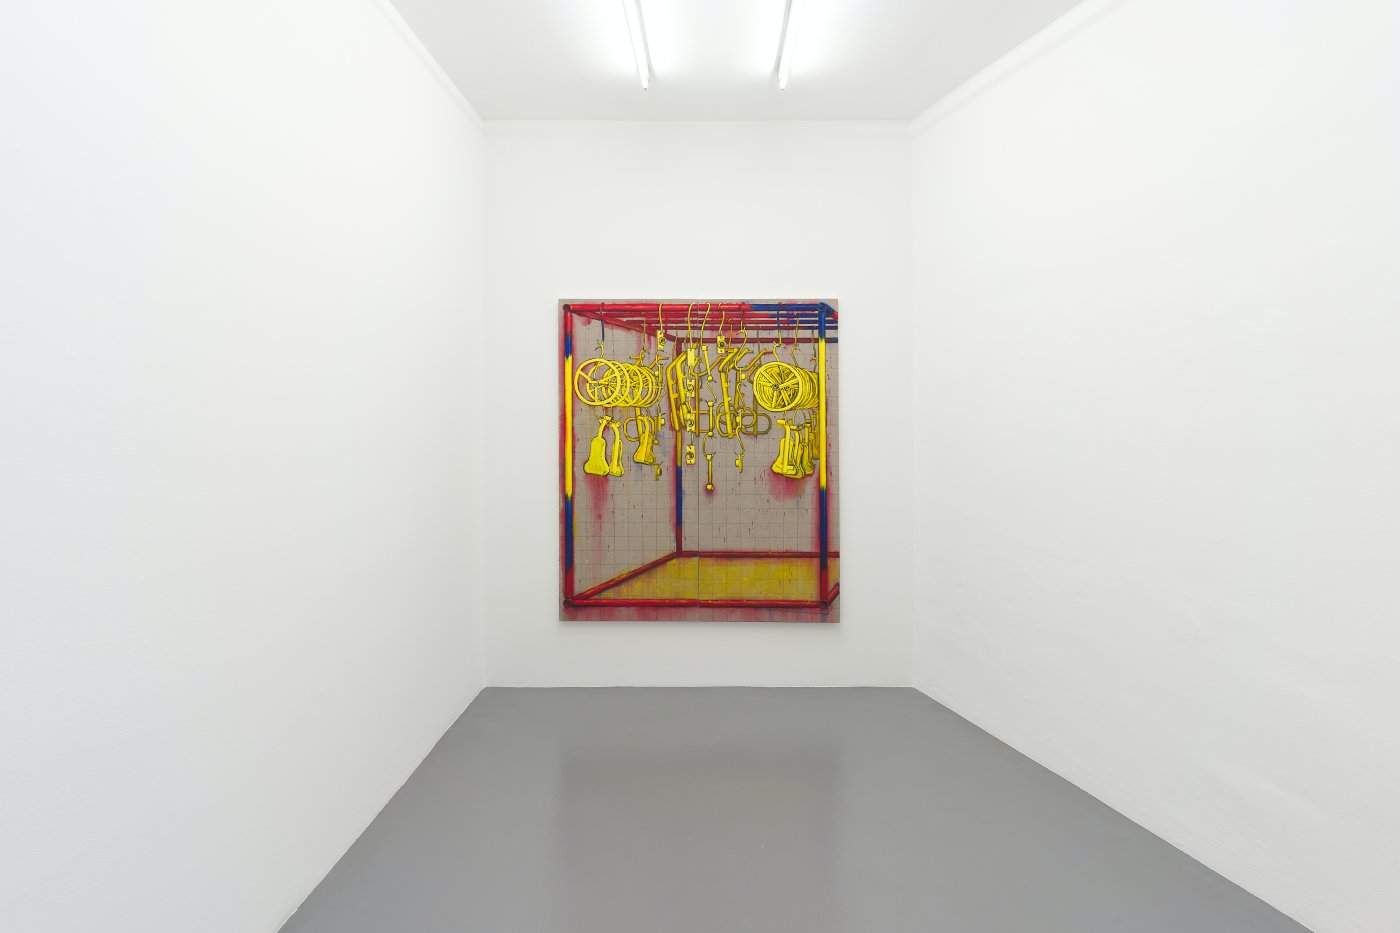 Installation image for Zang Kunkun: Double Screens, at Mai 36 Galerie